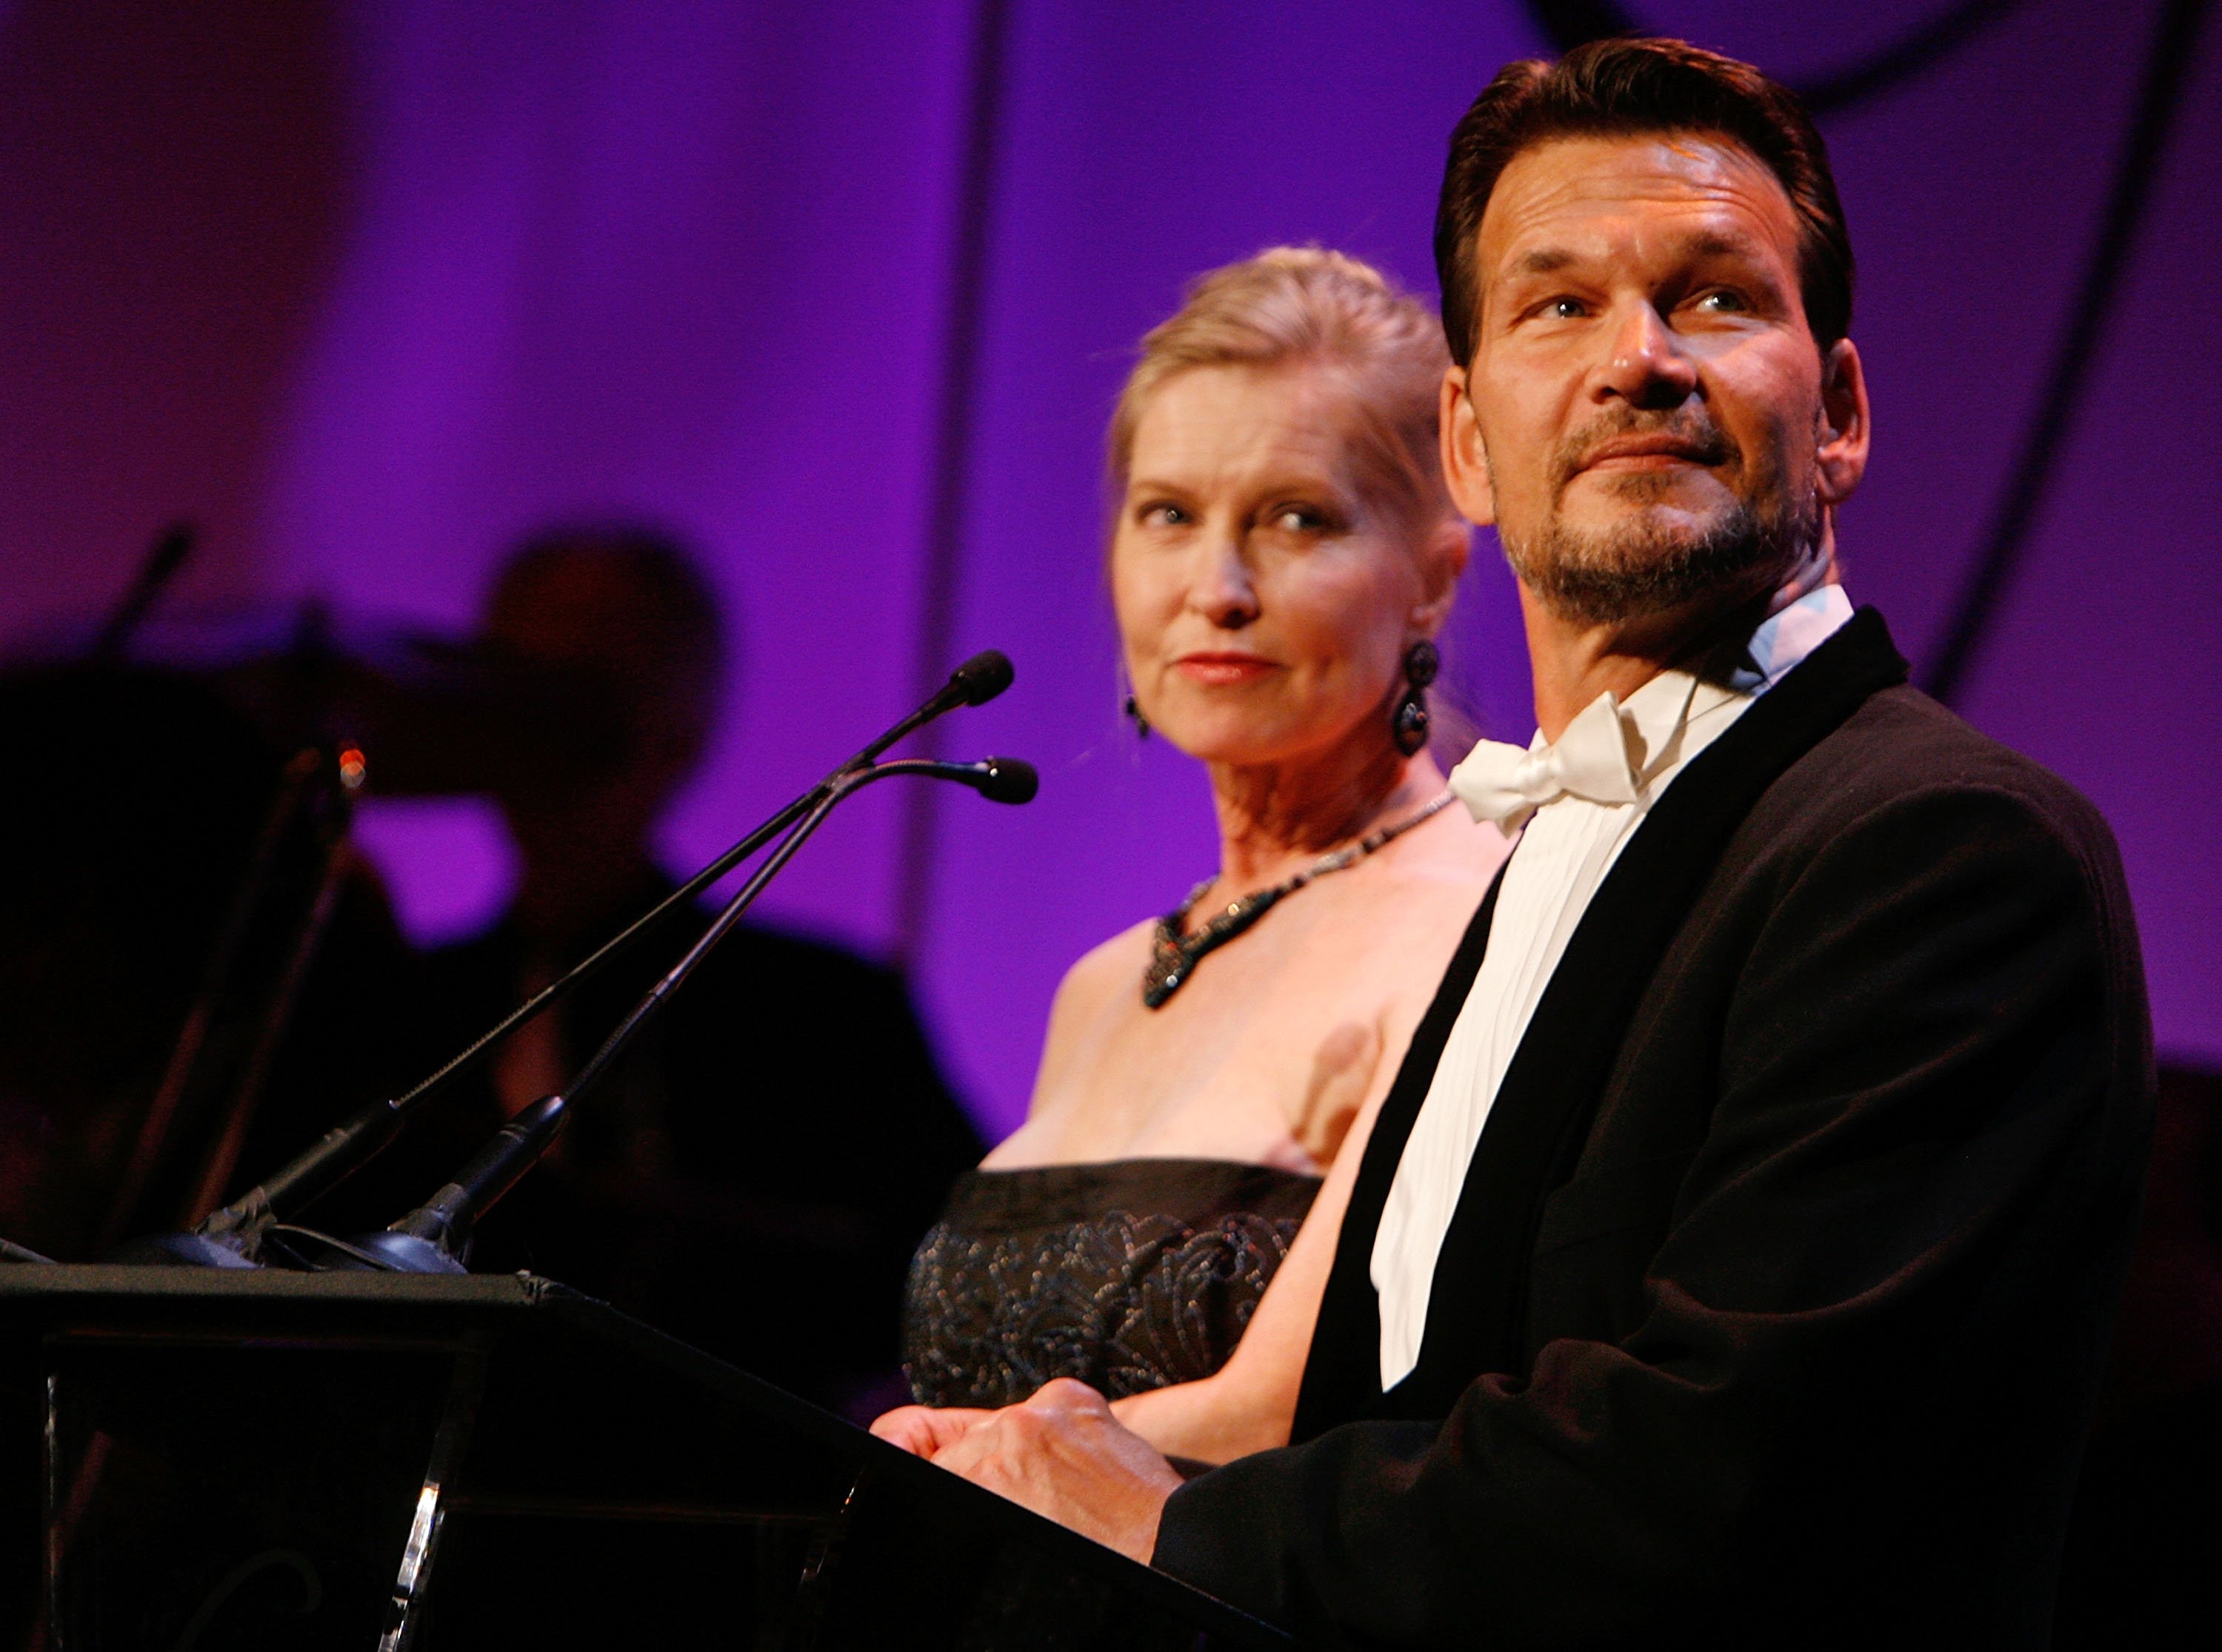 Lisa Niemi and actor Patrick Swayze during the 9th annual Costume Designers Guild Awards on February 17, 2007 | Photo: Getty Images